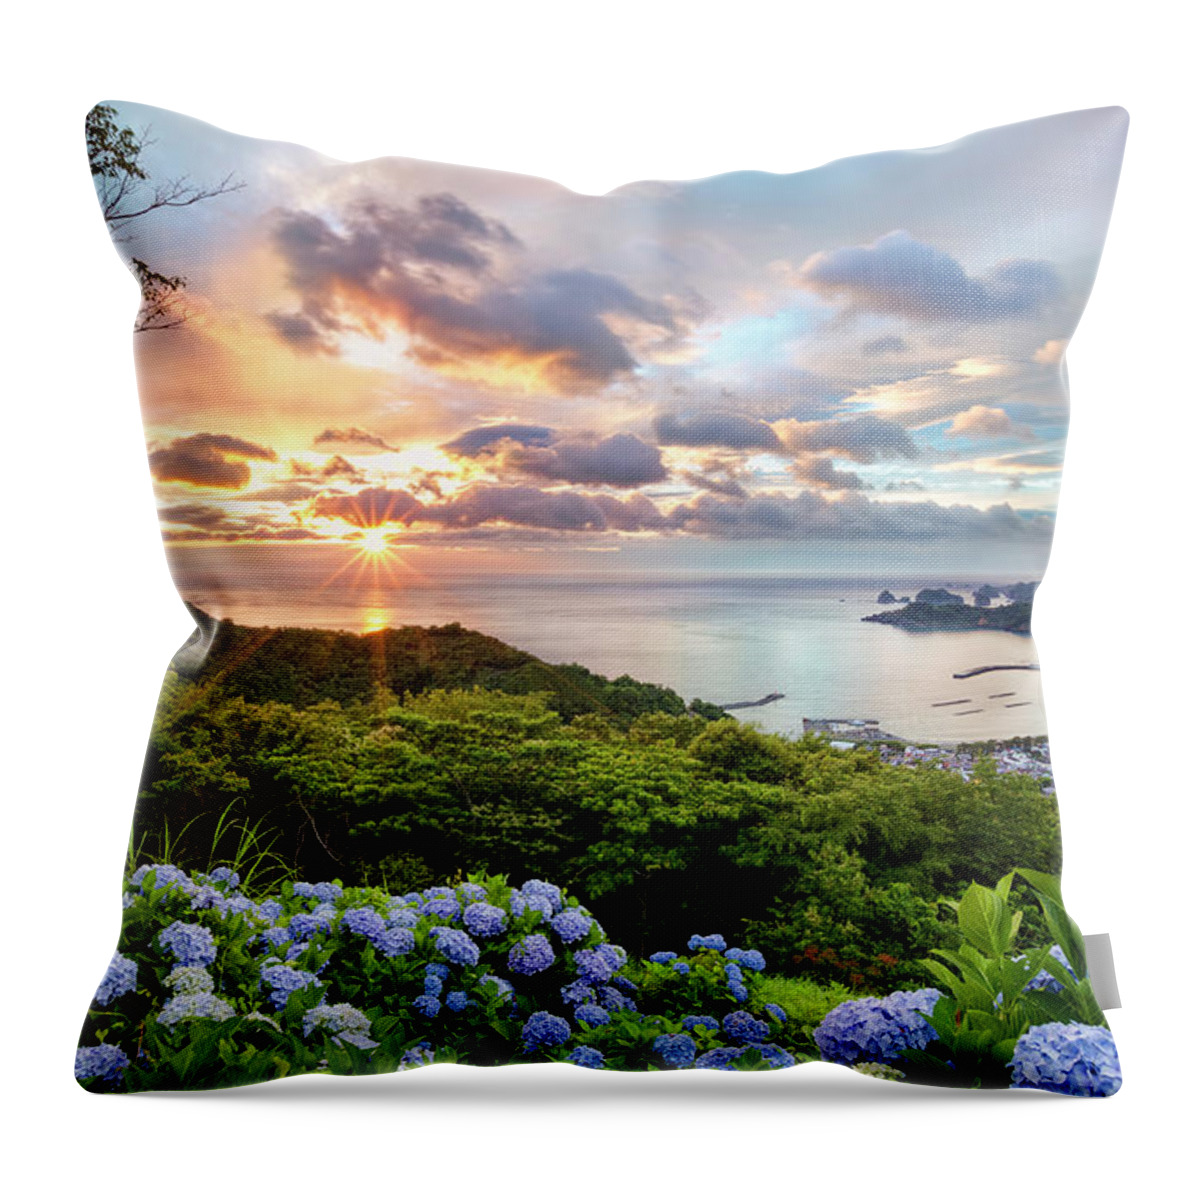 Tranquil Scene Throw Pillow featuring the photograph Sunset At Hydrangea Hills by Tommy Tsutsui